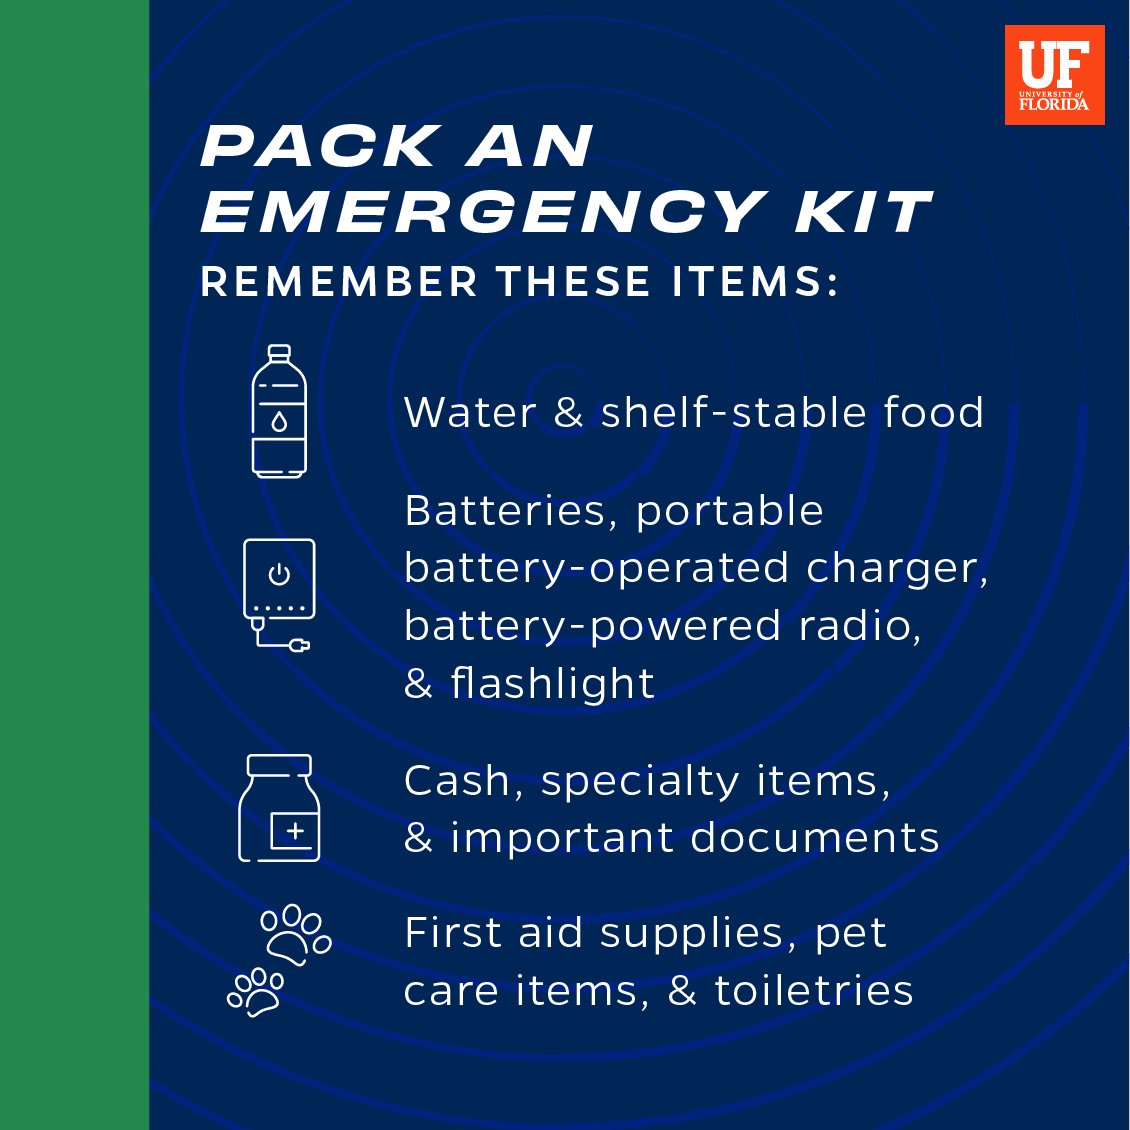 As you prepare for Tropical Storm #Idalia: ➡️ Stock an emergency kit ⛽️ Fuel your vehicle 📞 Inform friends and family of your plan 🪴 Remove/secure outside items 💻 Monitor ufl.edu, UF social, @UFAlert, @NWS, and download the GatorSafe app